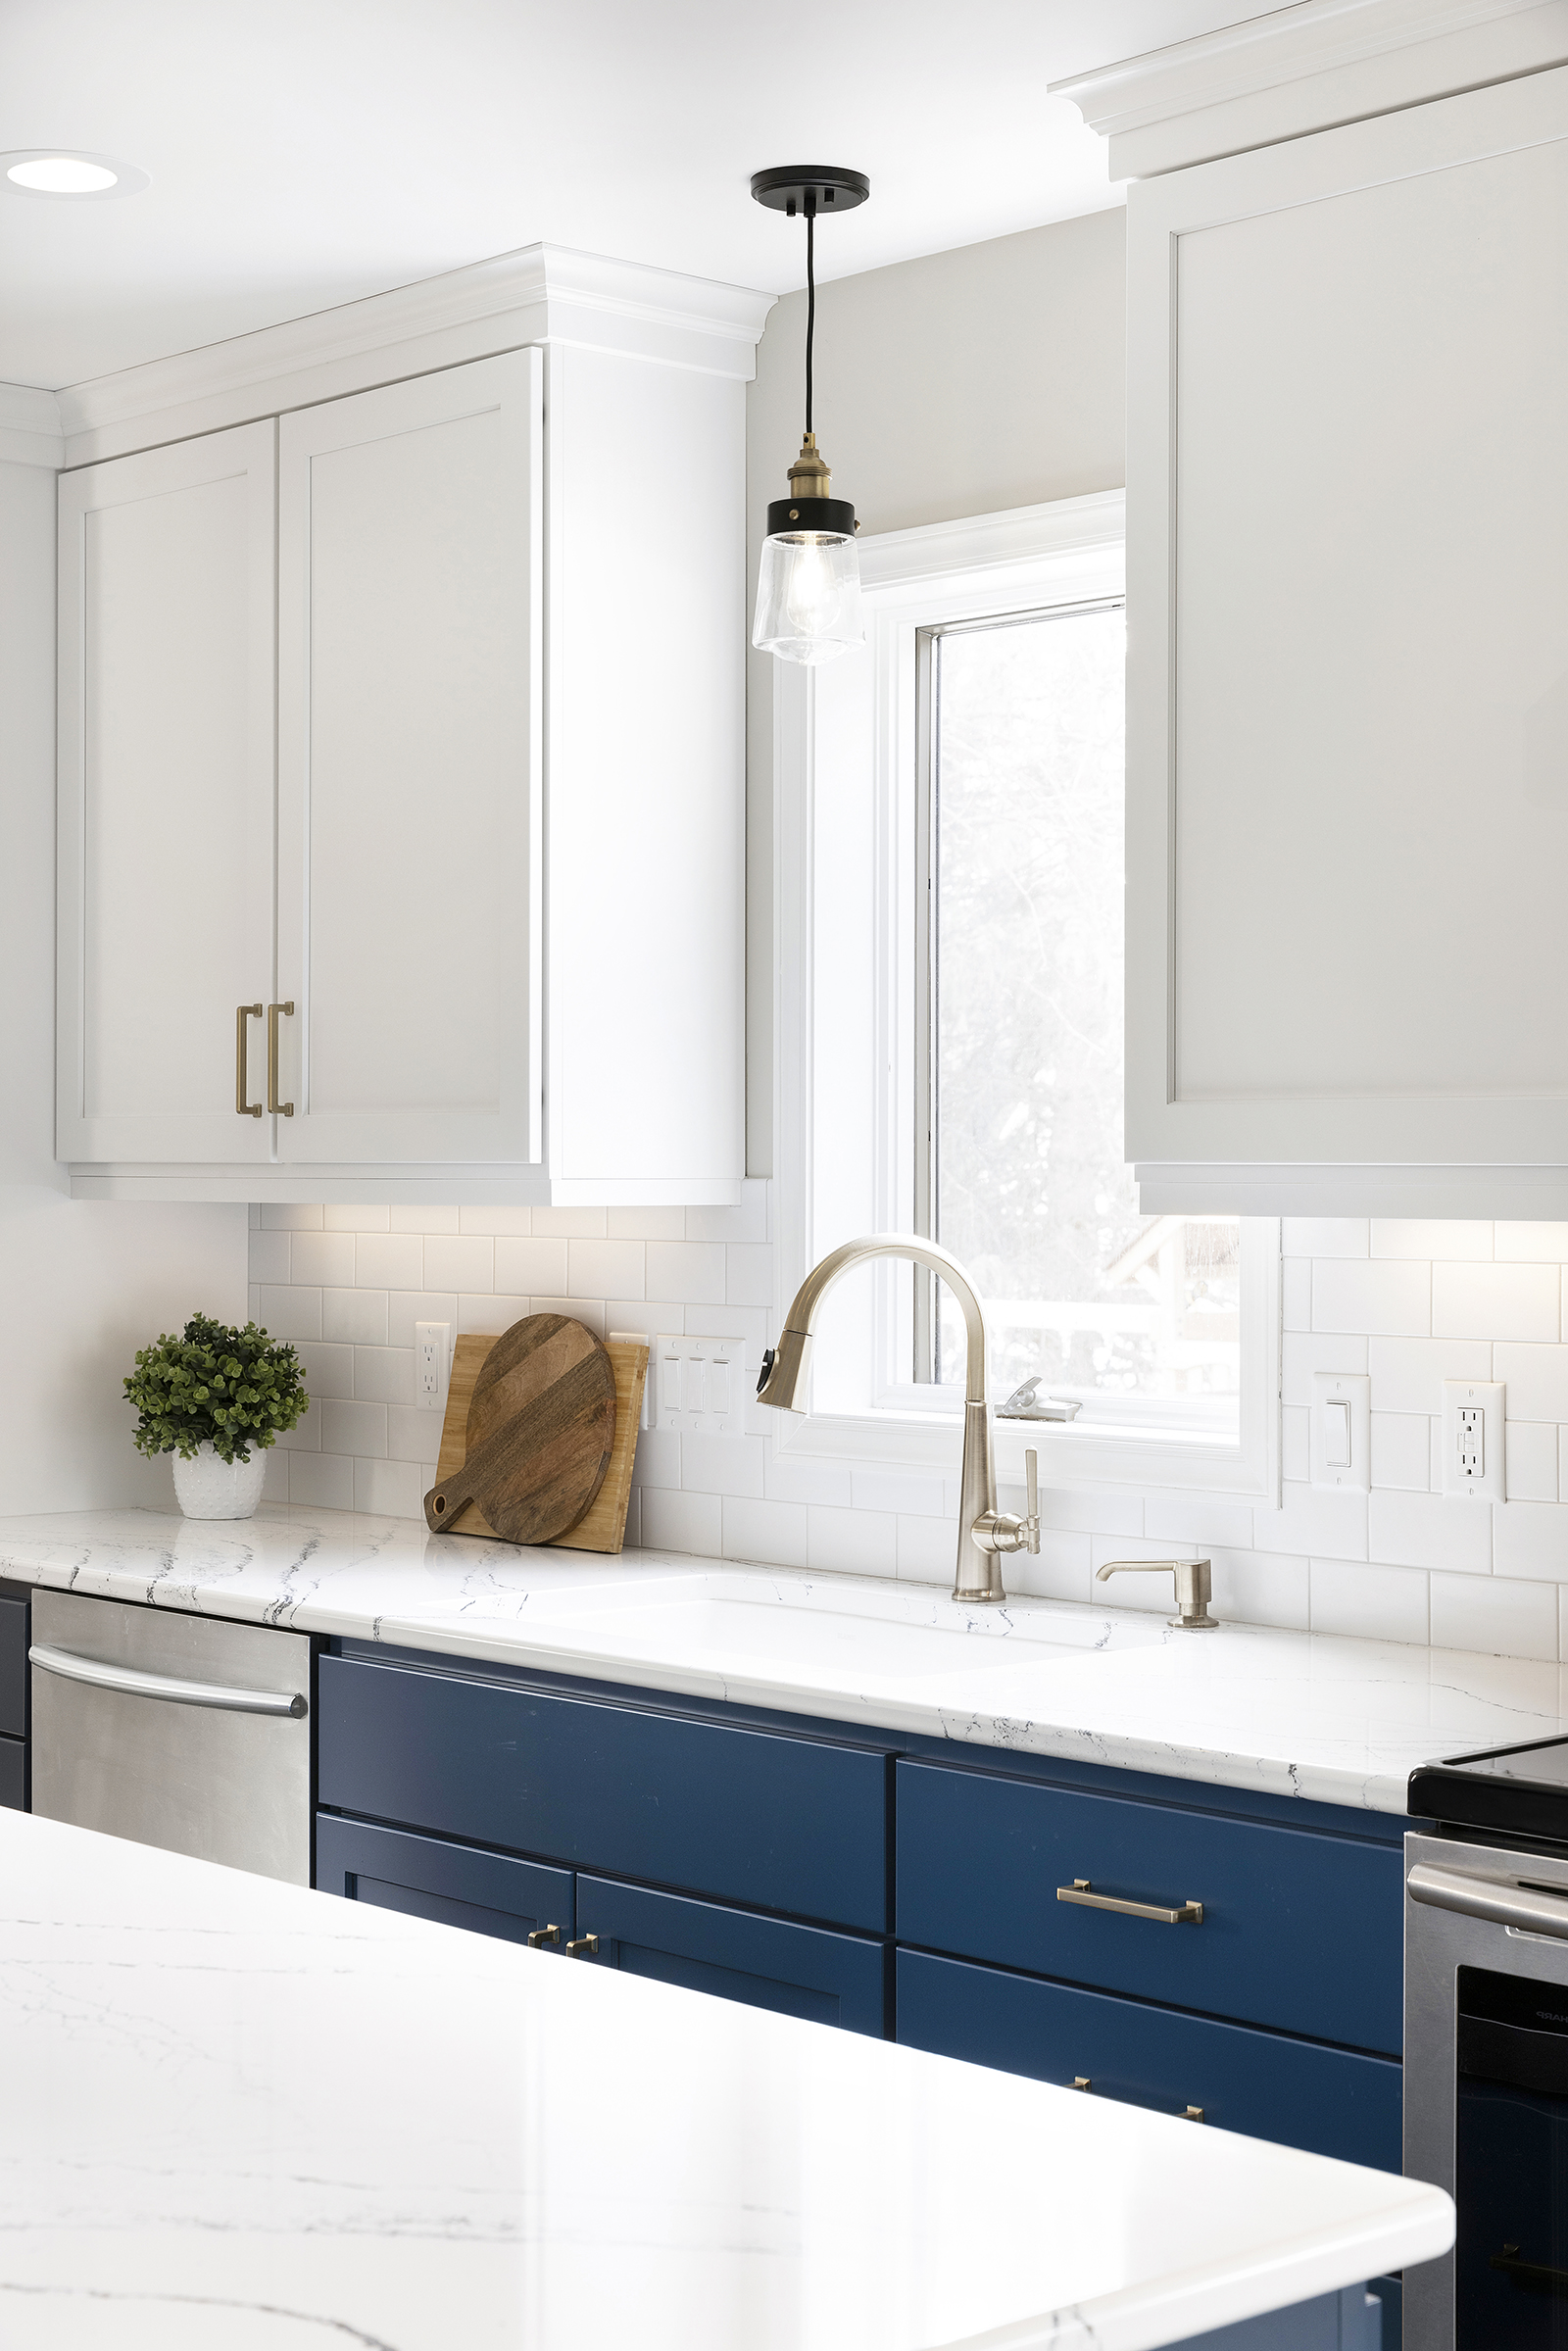 Renovated kitchen with white upper cabinets, blue lower cabinets, and window over sink with light